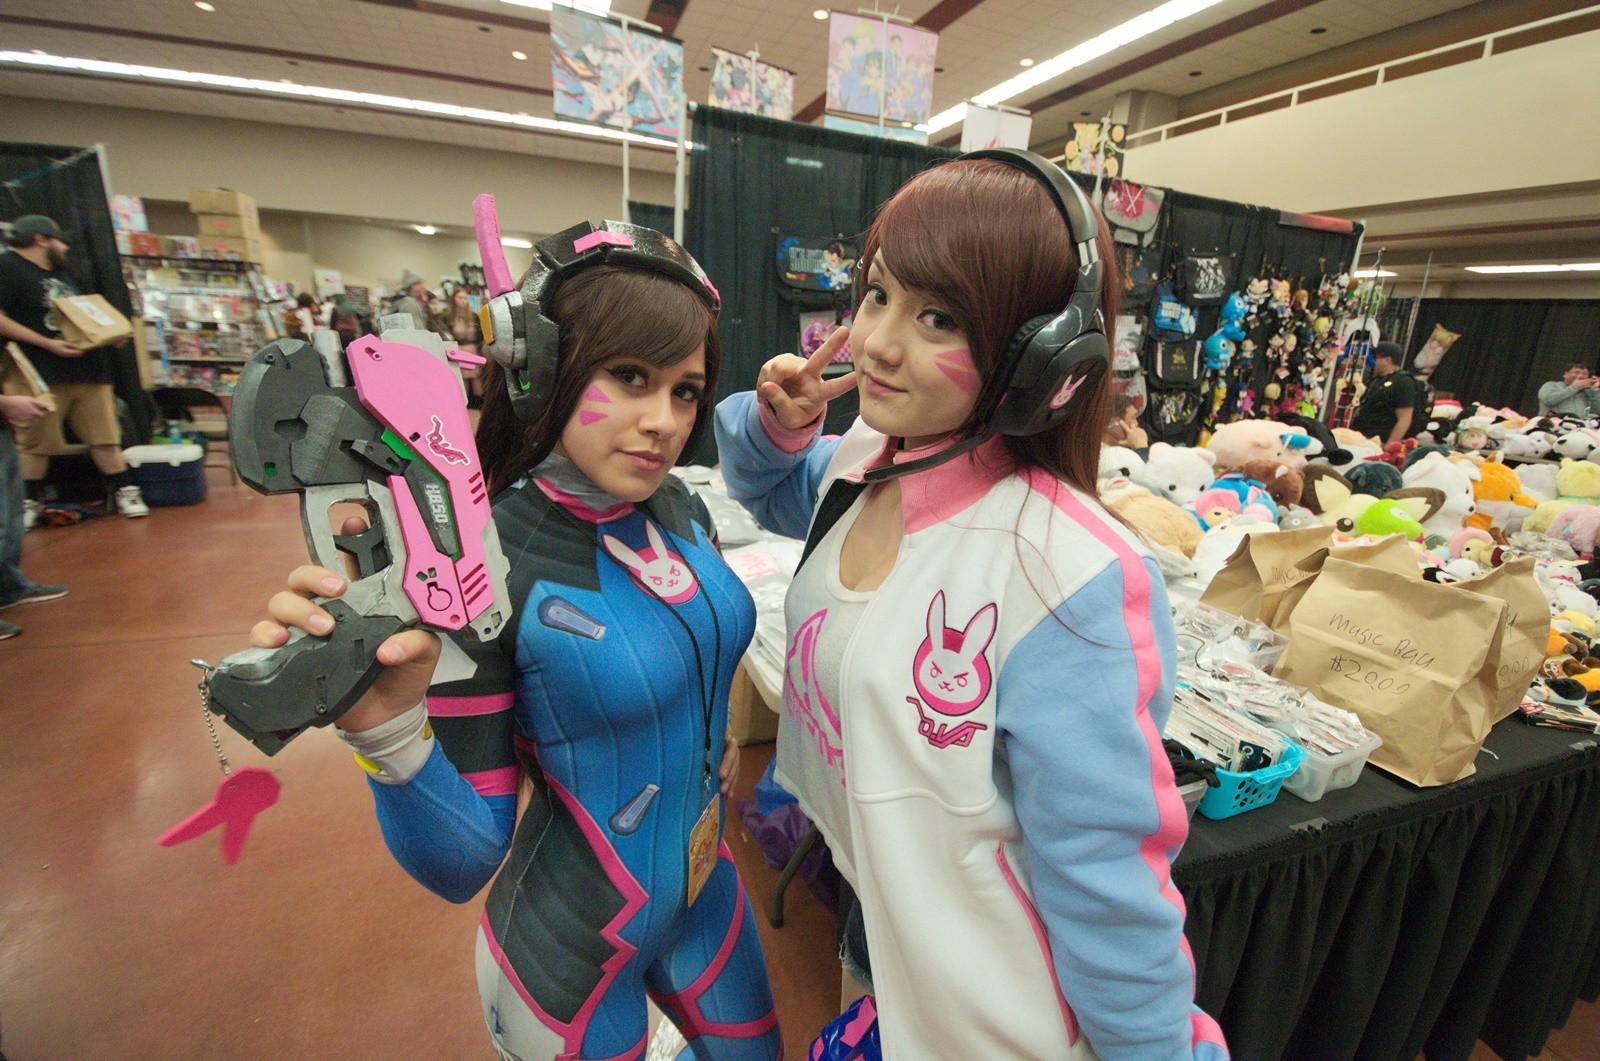 From panels to cosplay to art, thousands of fans find community at Anime  Expo - Daily Bruin